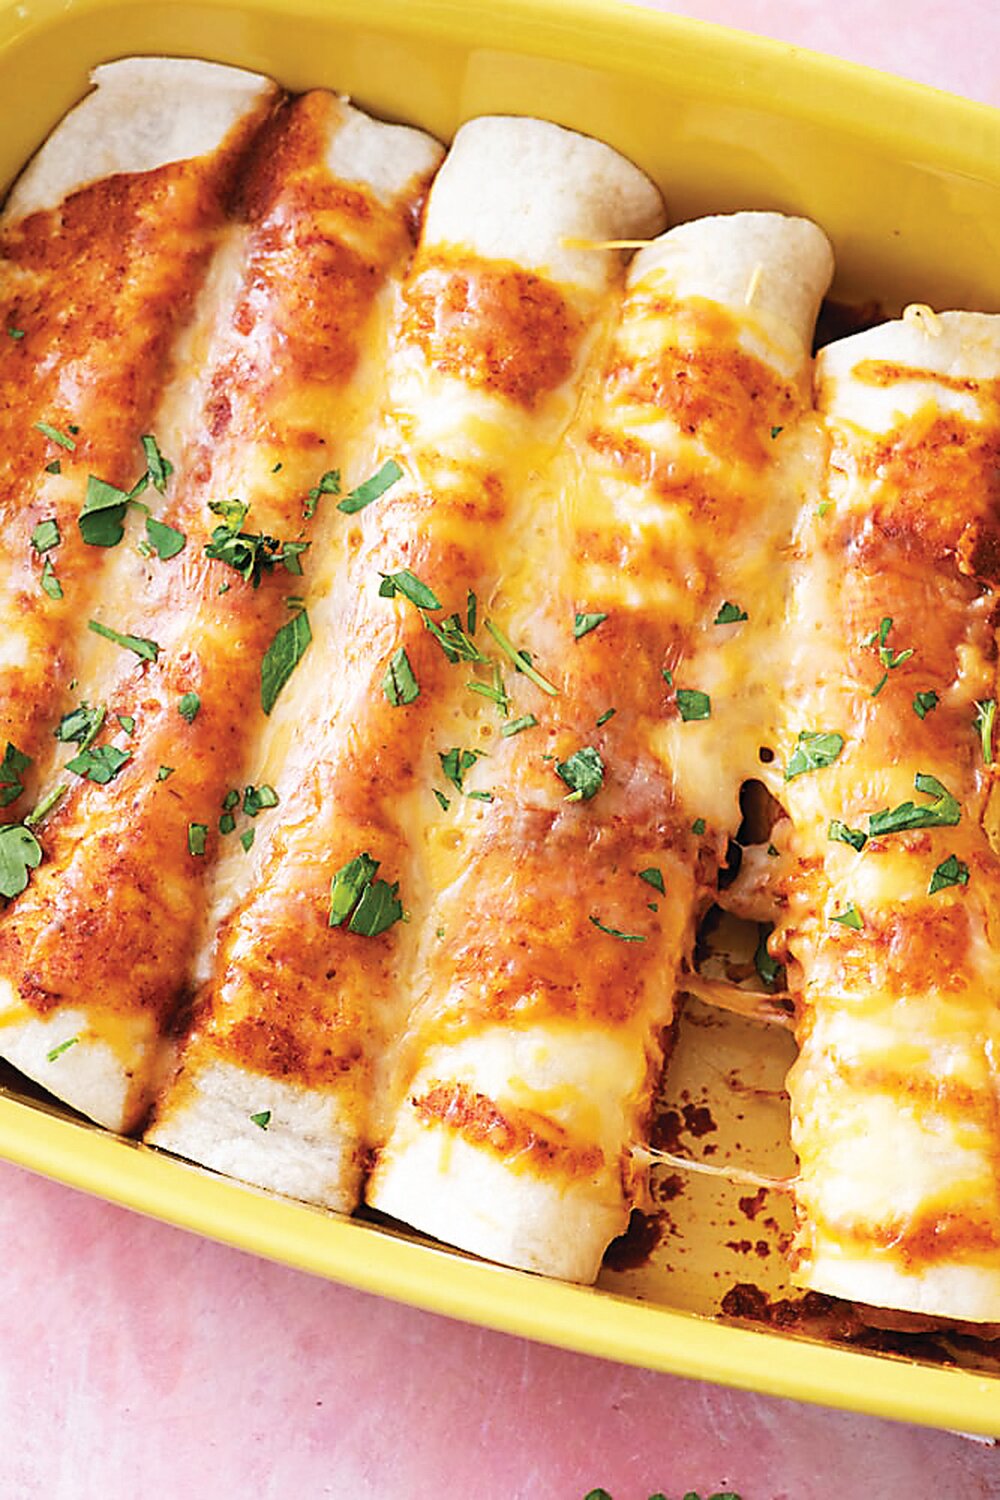 Mexican food is welcome any time, but these enchiladas would make a perfect entrée for a Cinco de Mayo celebration.